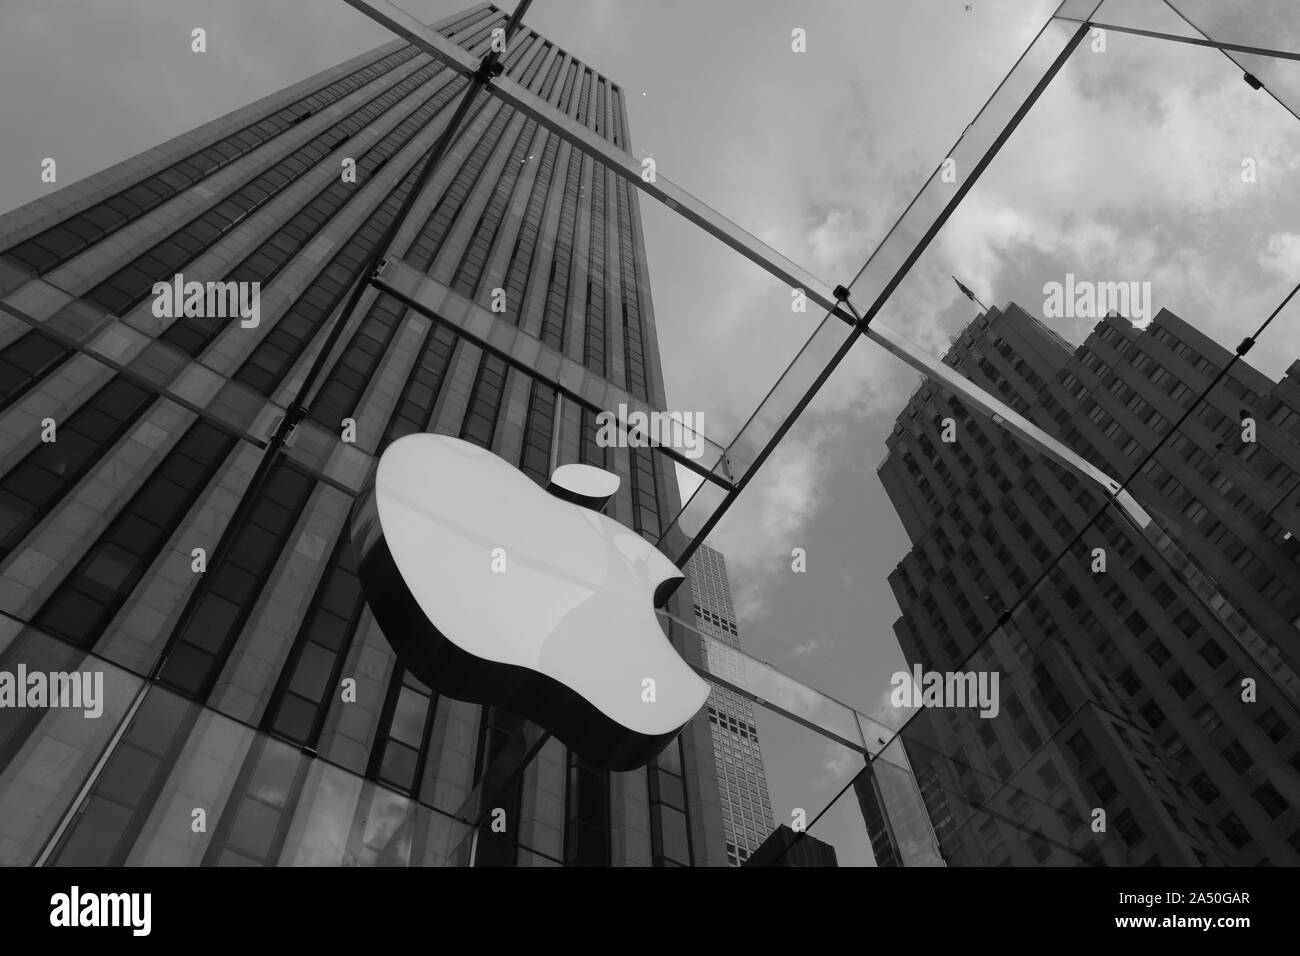 This Picture is taken from the stairs of 5th Avenue Apple Store, Manhattan. NYC. Stock Photo